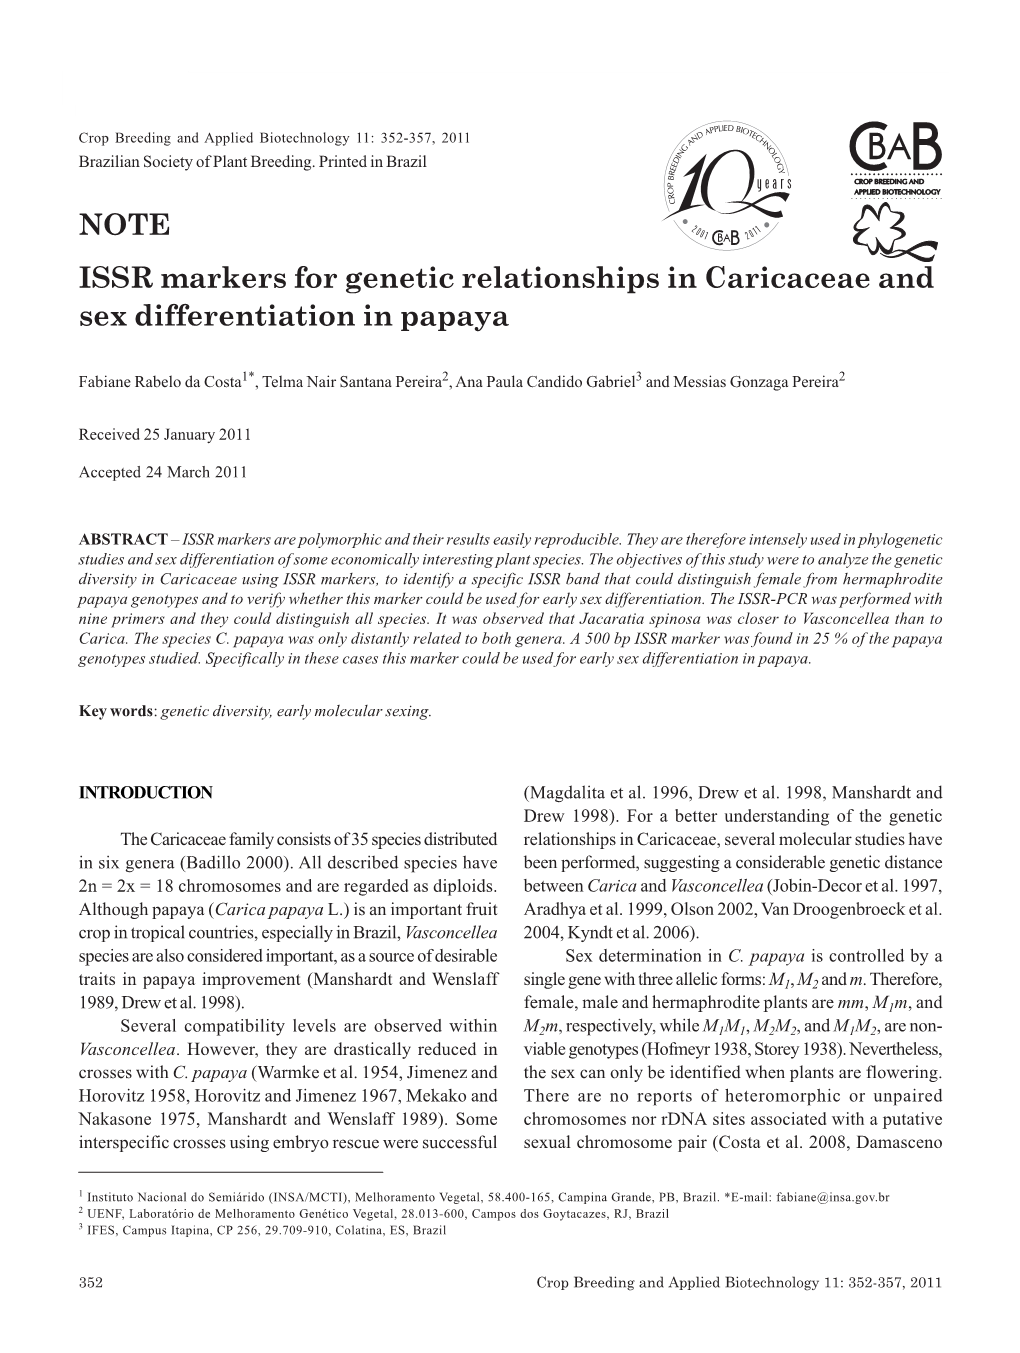 ISSR Markers for Genetic Relationships in Caricaceae and Sex Differentiation in Papaya